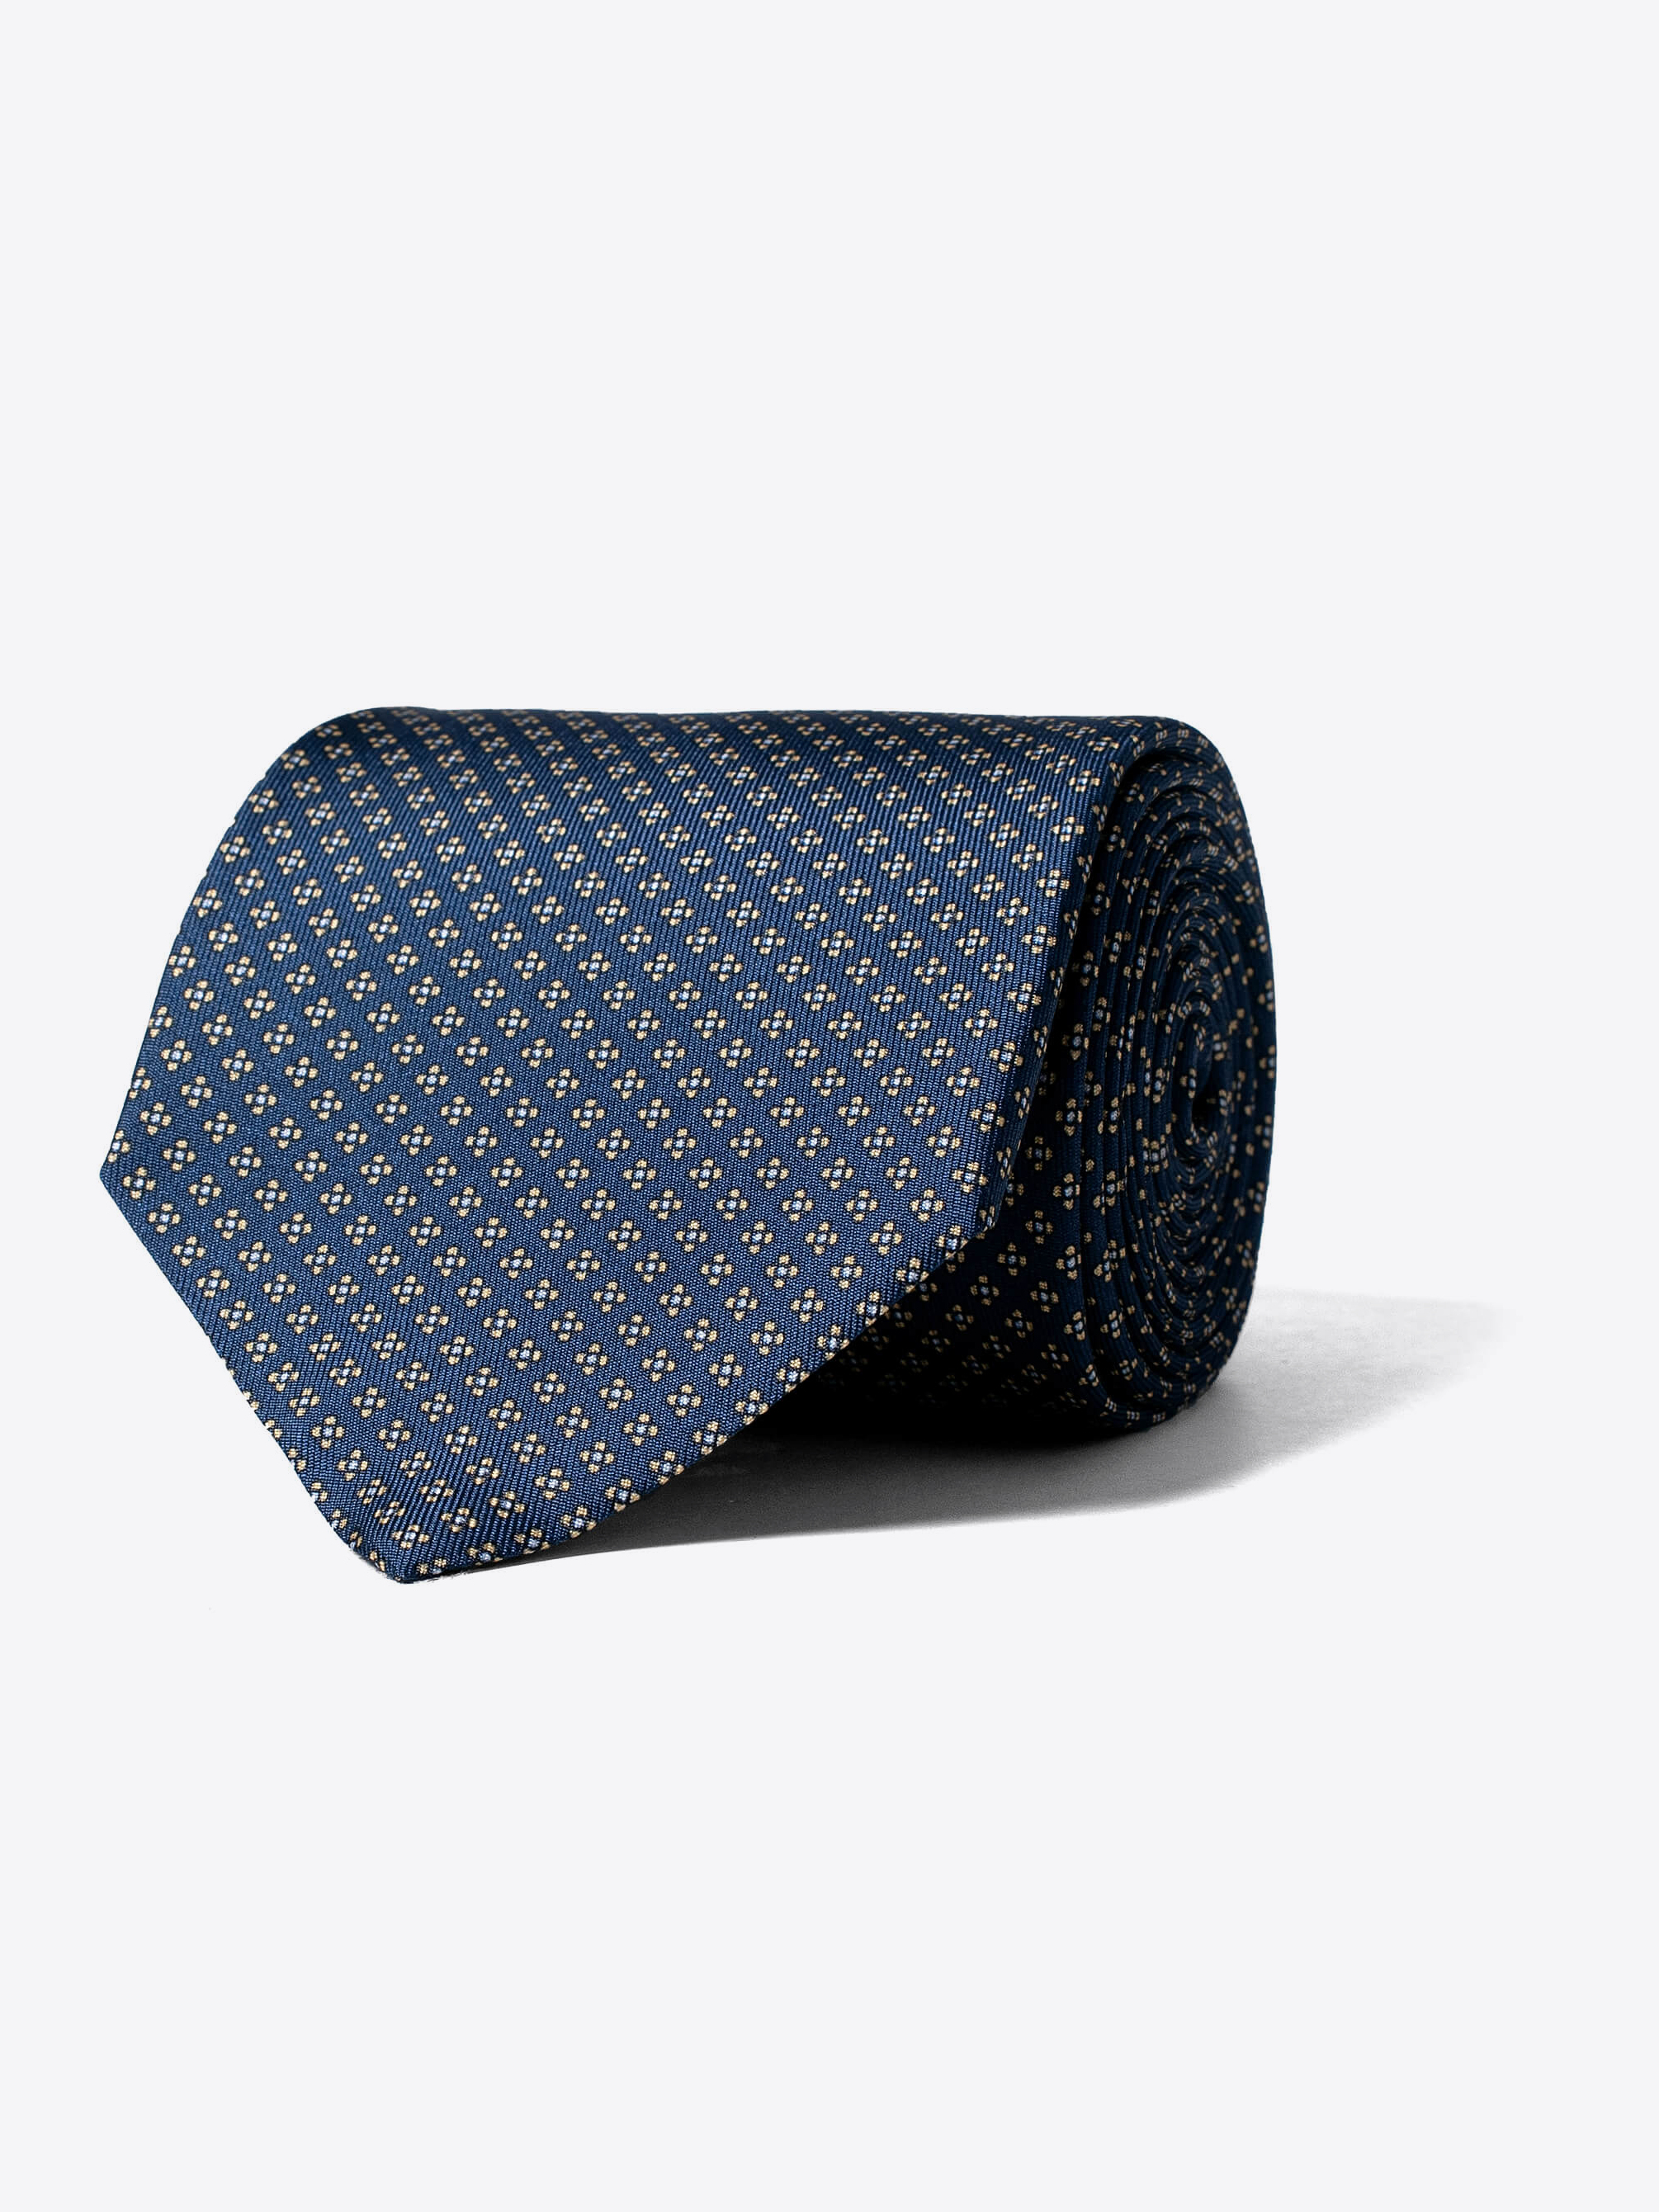 Zoom Image of Navy and Yellow Small Foulard Silk Tie